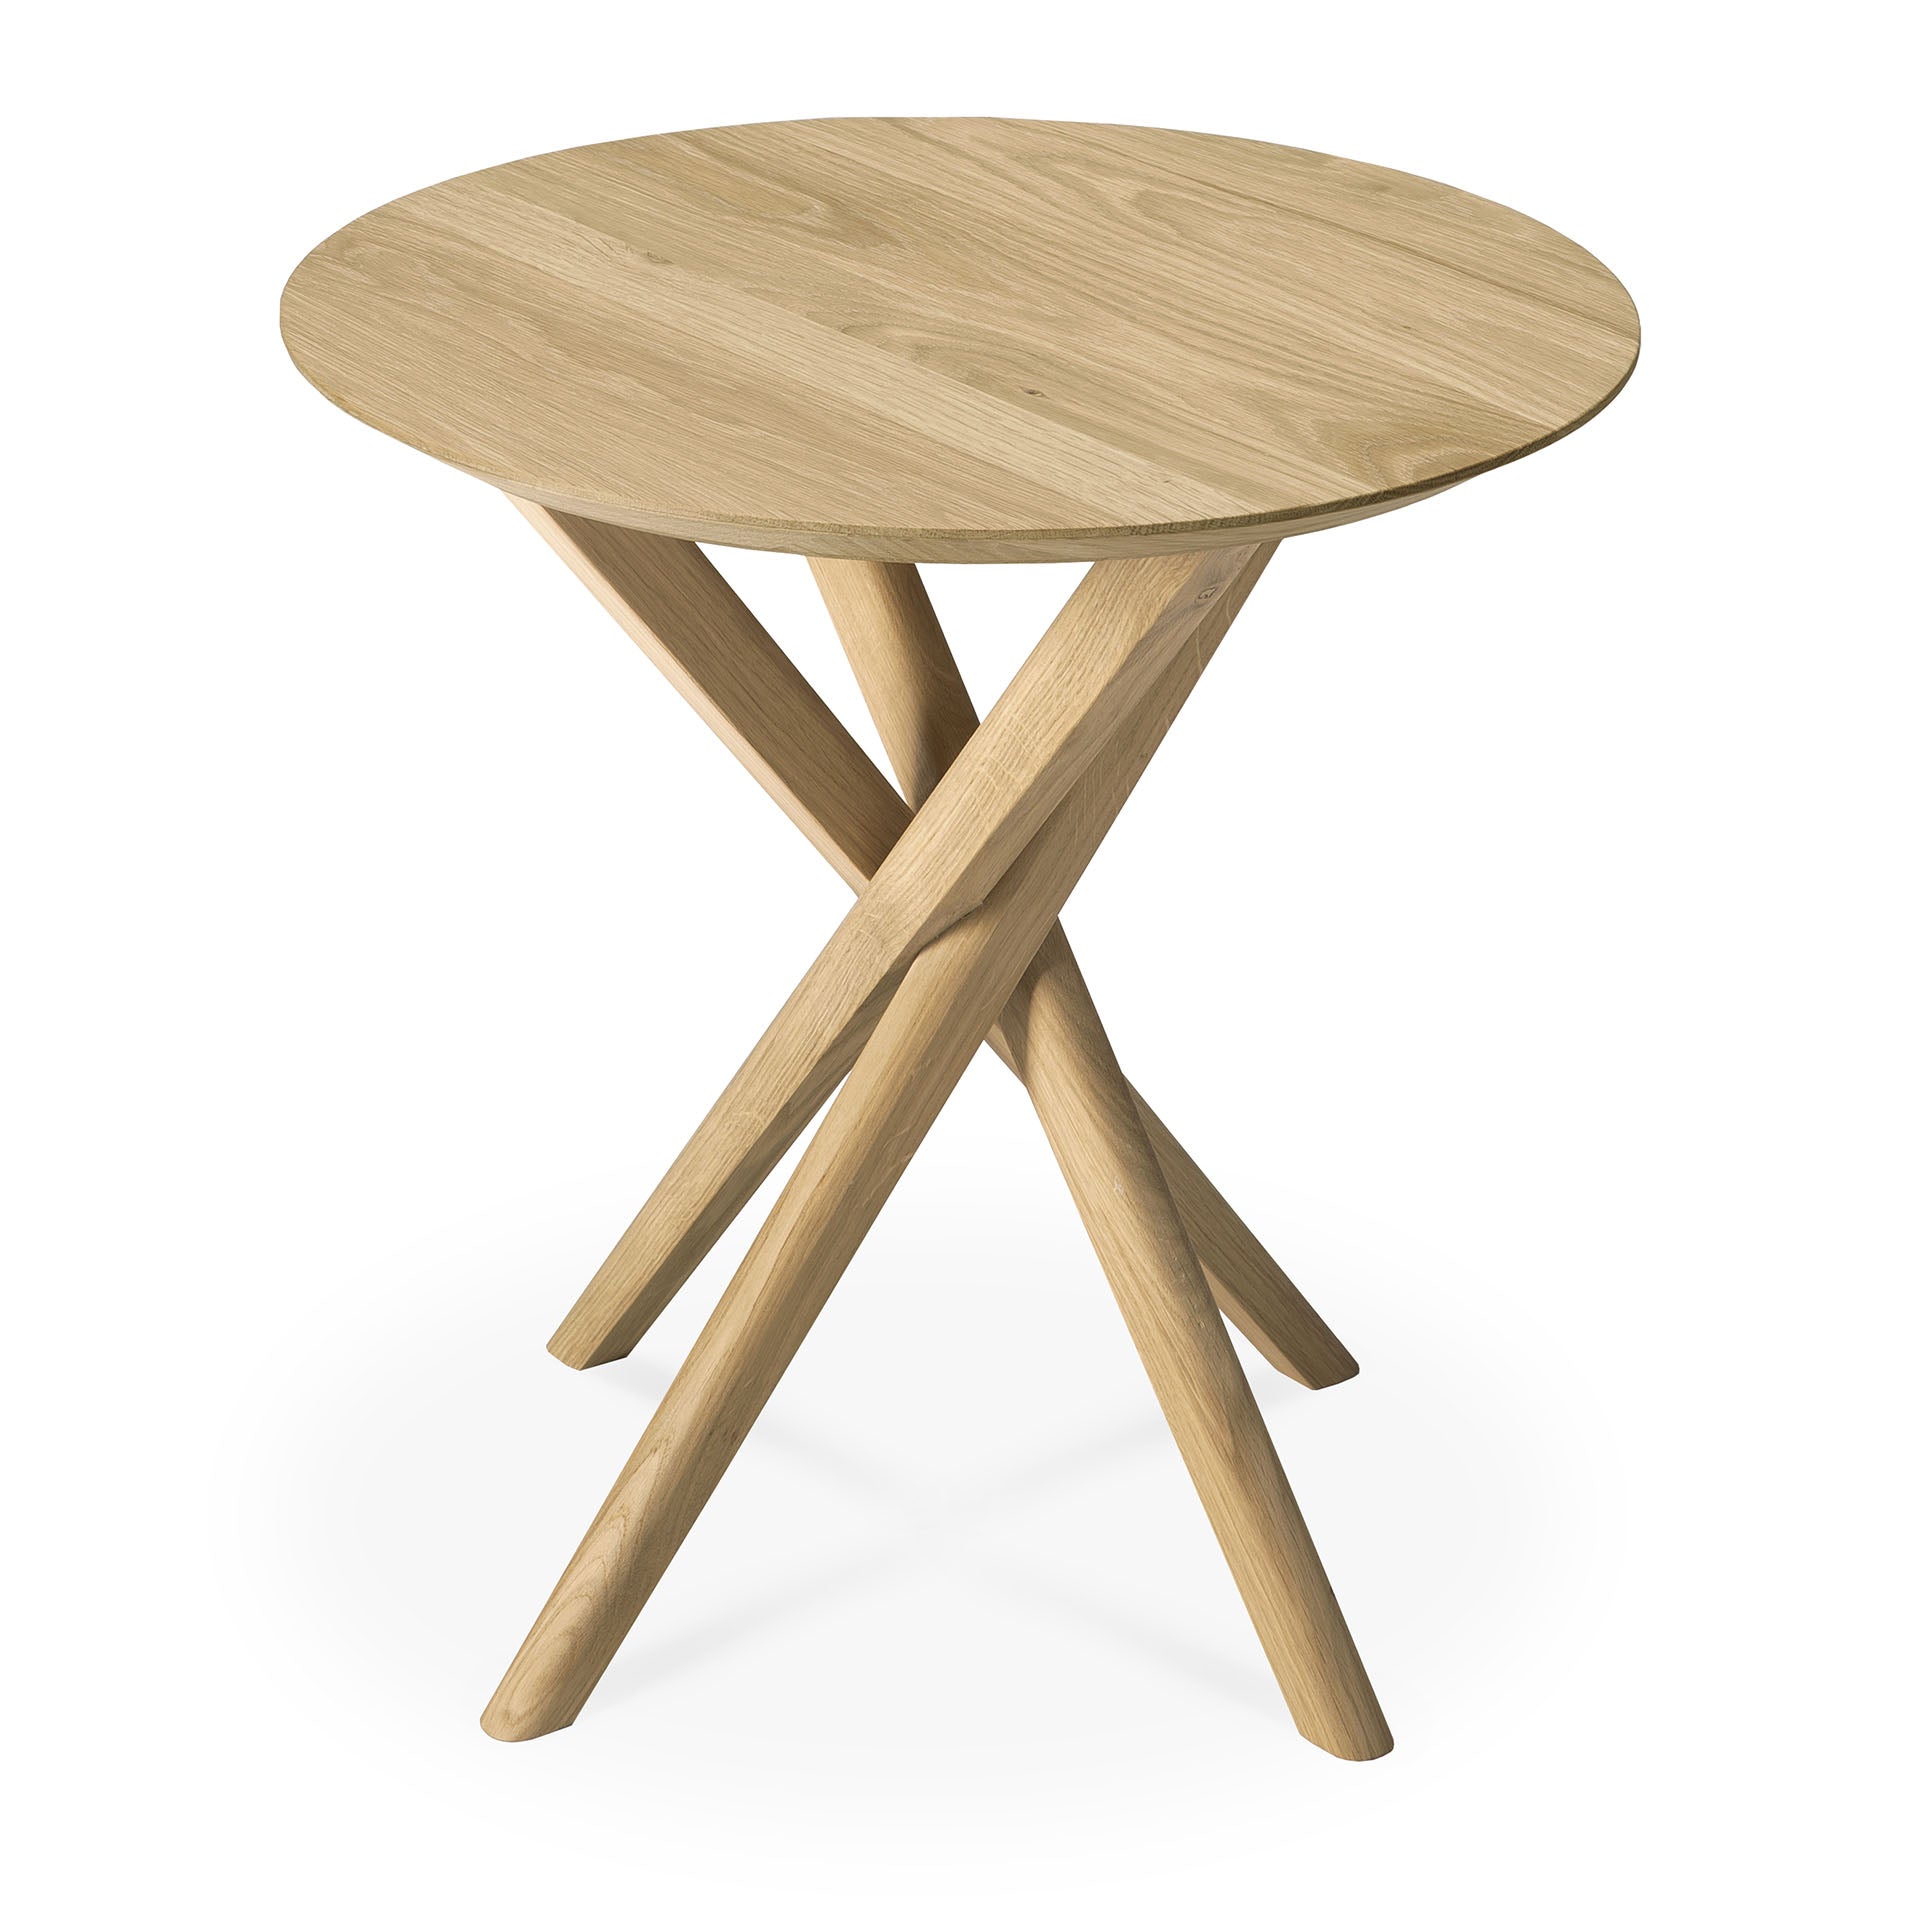 Ethnicraft Oak Mikado Side Table available from Make Your House A Home, Bendigo, Victoria, Australia